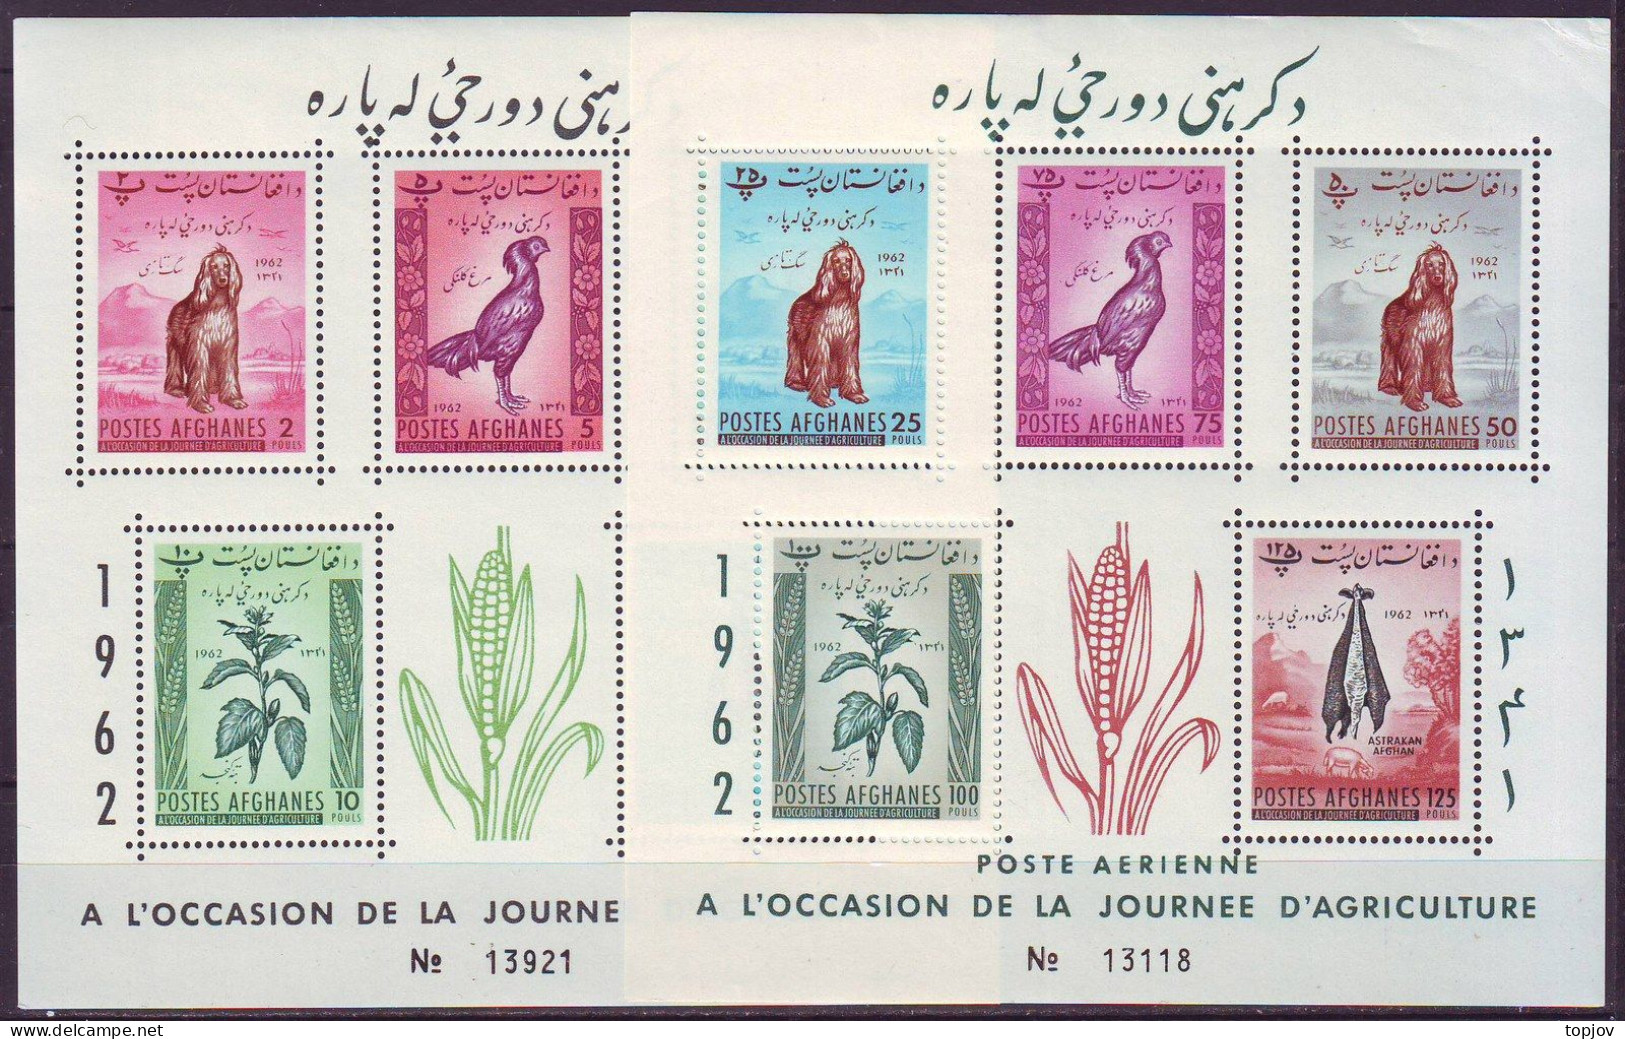 AFGHANISTAN - AGRICULTURE DAY - PERF.+ IMPERF DOG ASTRAKAN PHEASANT CORN - 4MS - **MNH - 1962 - Ferme